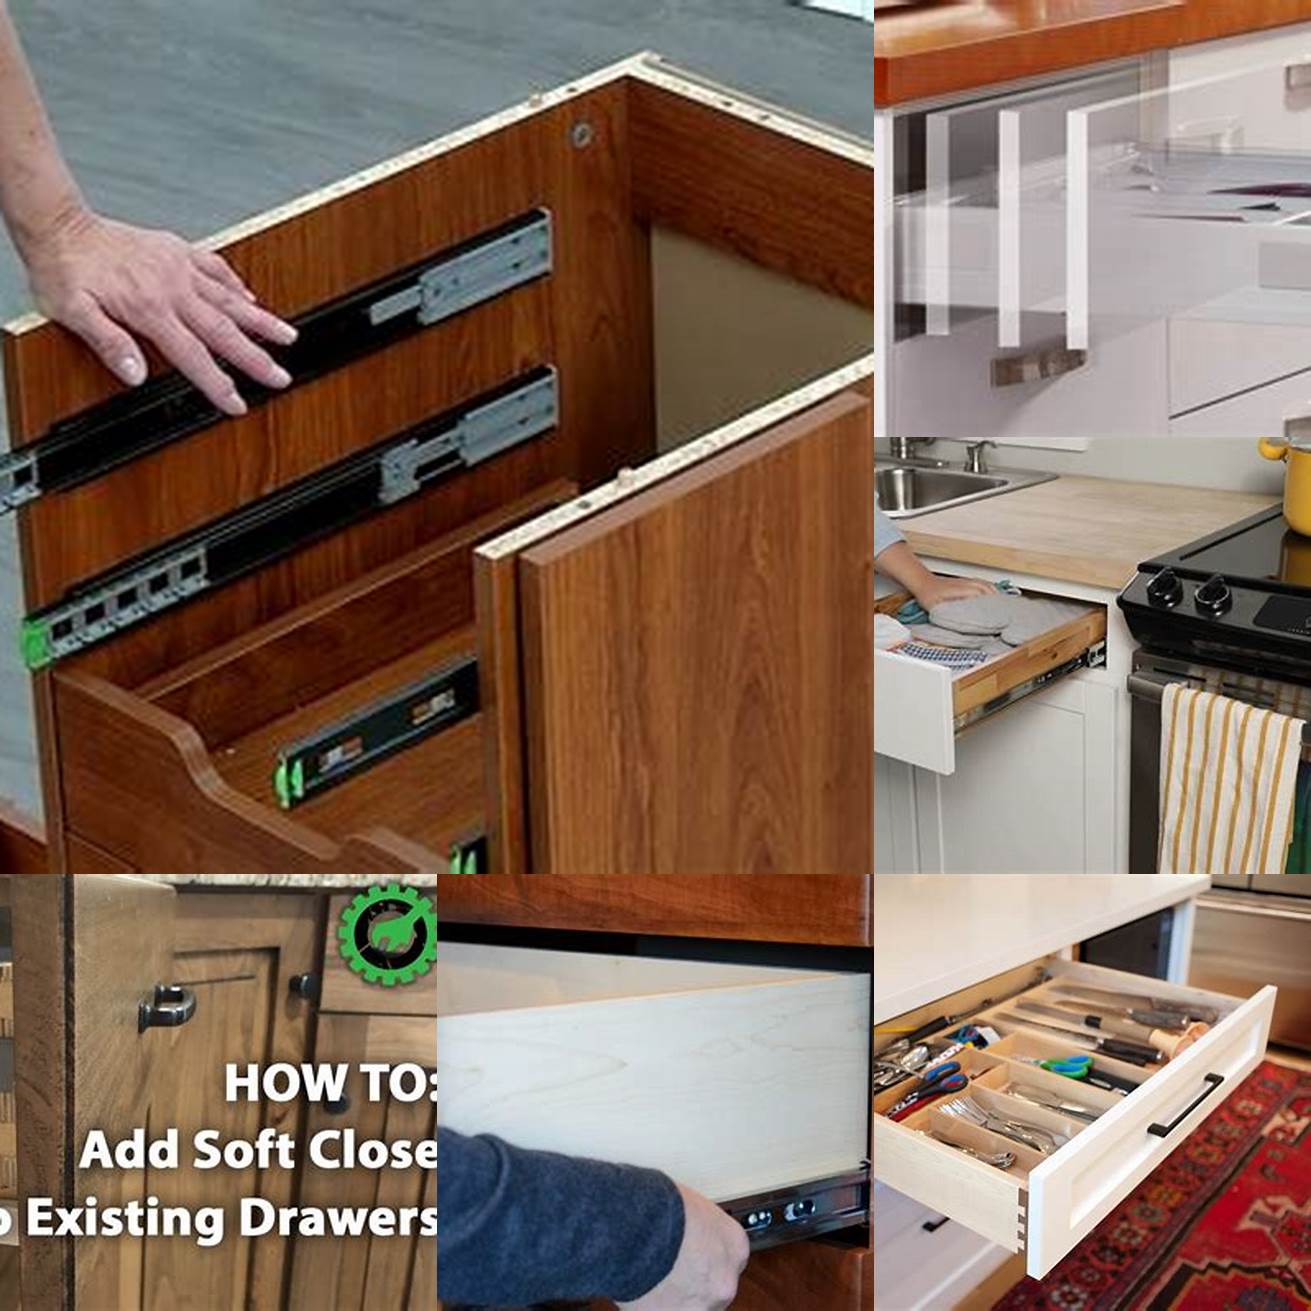 Soft-closing drawers and doors prevent any damage caused by slamming or banging